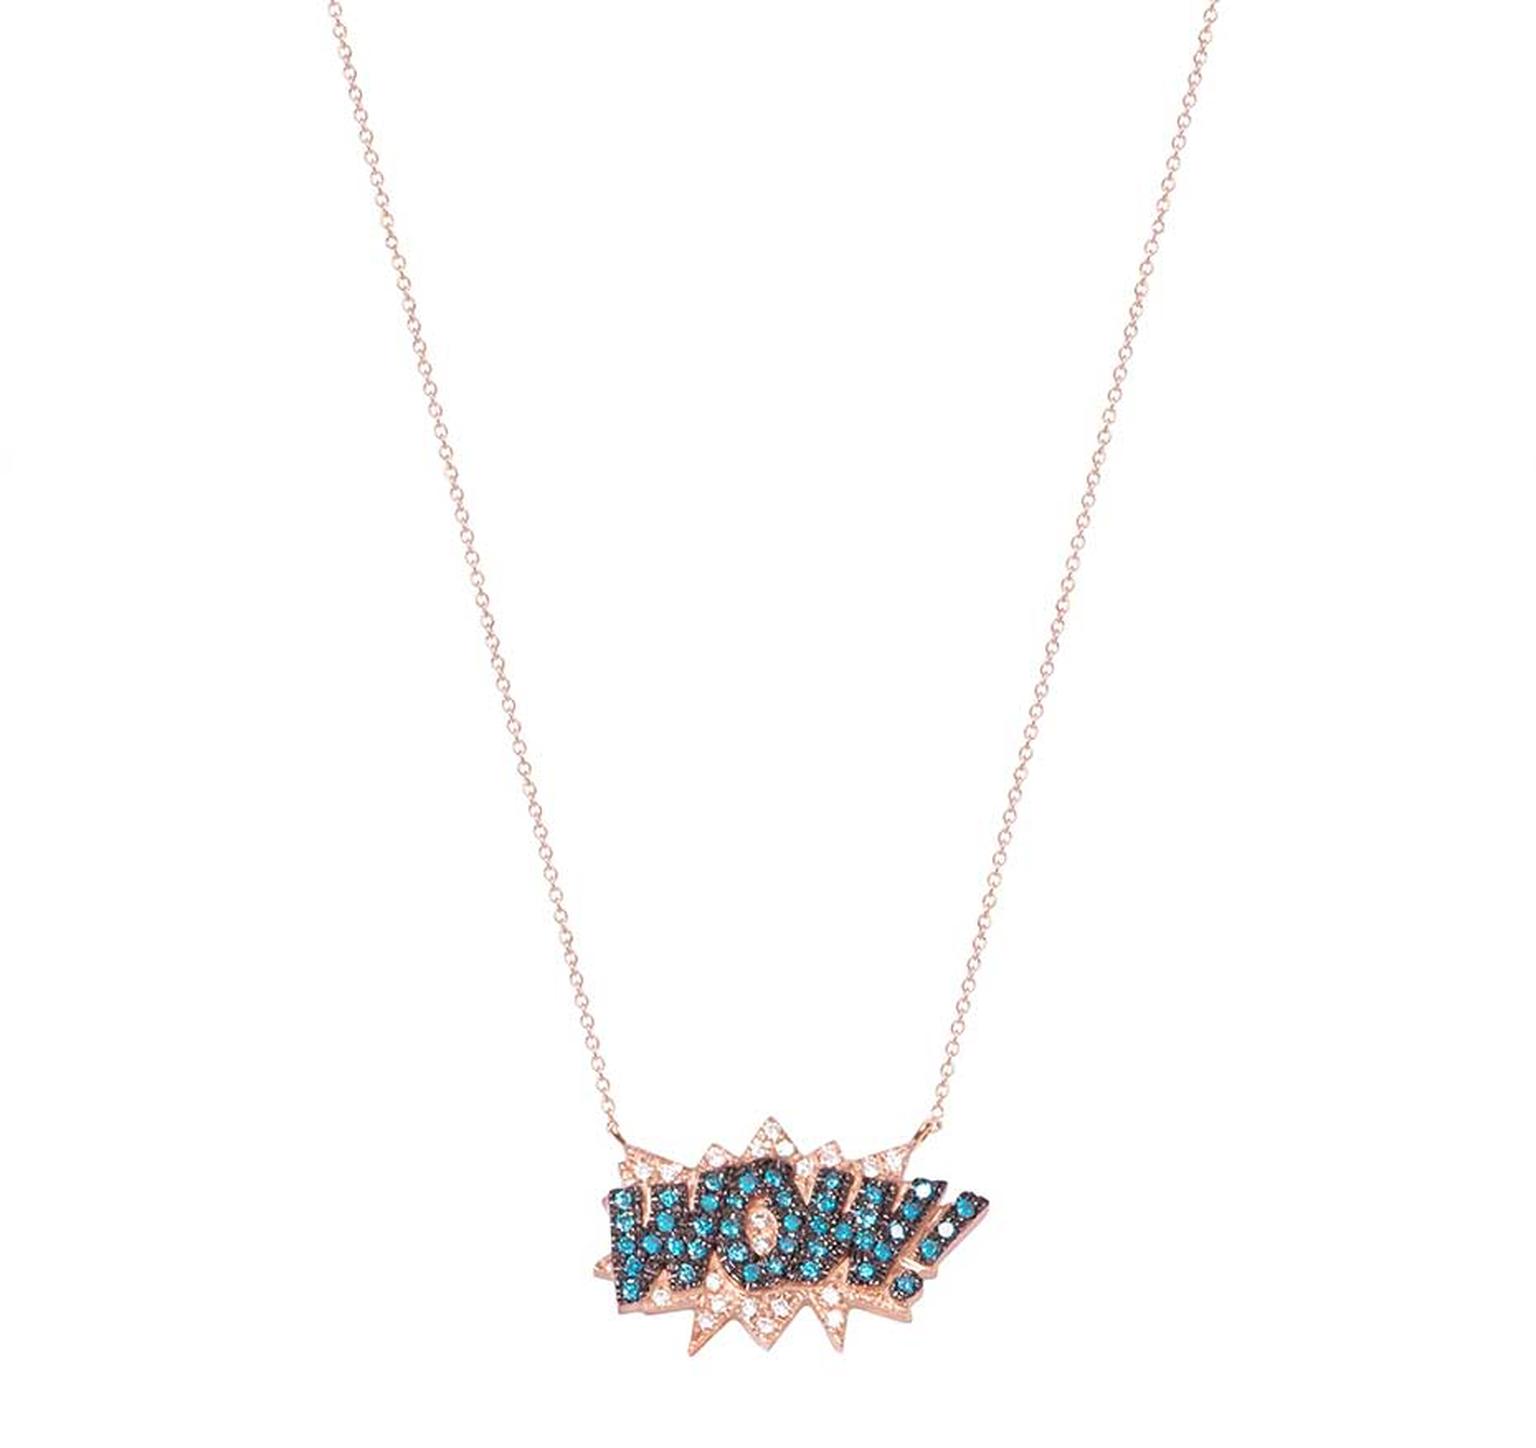 Diane Kordas Wow necklace with white and blue diamonds on a rose gold chain.